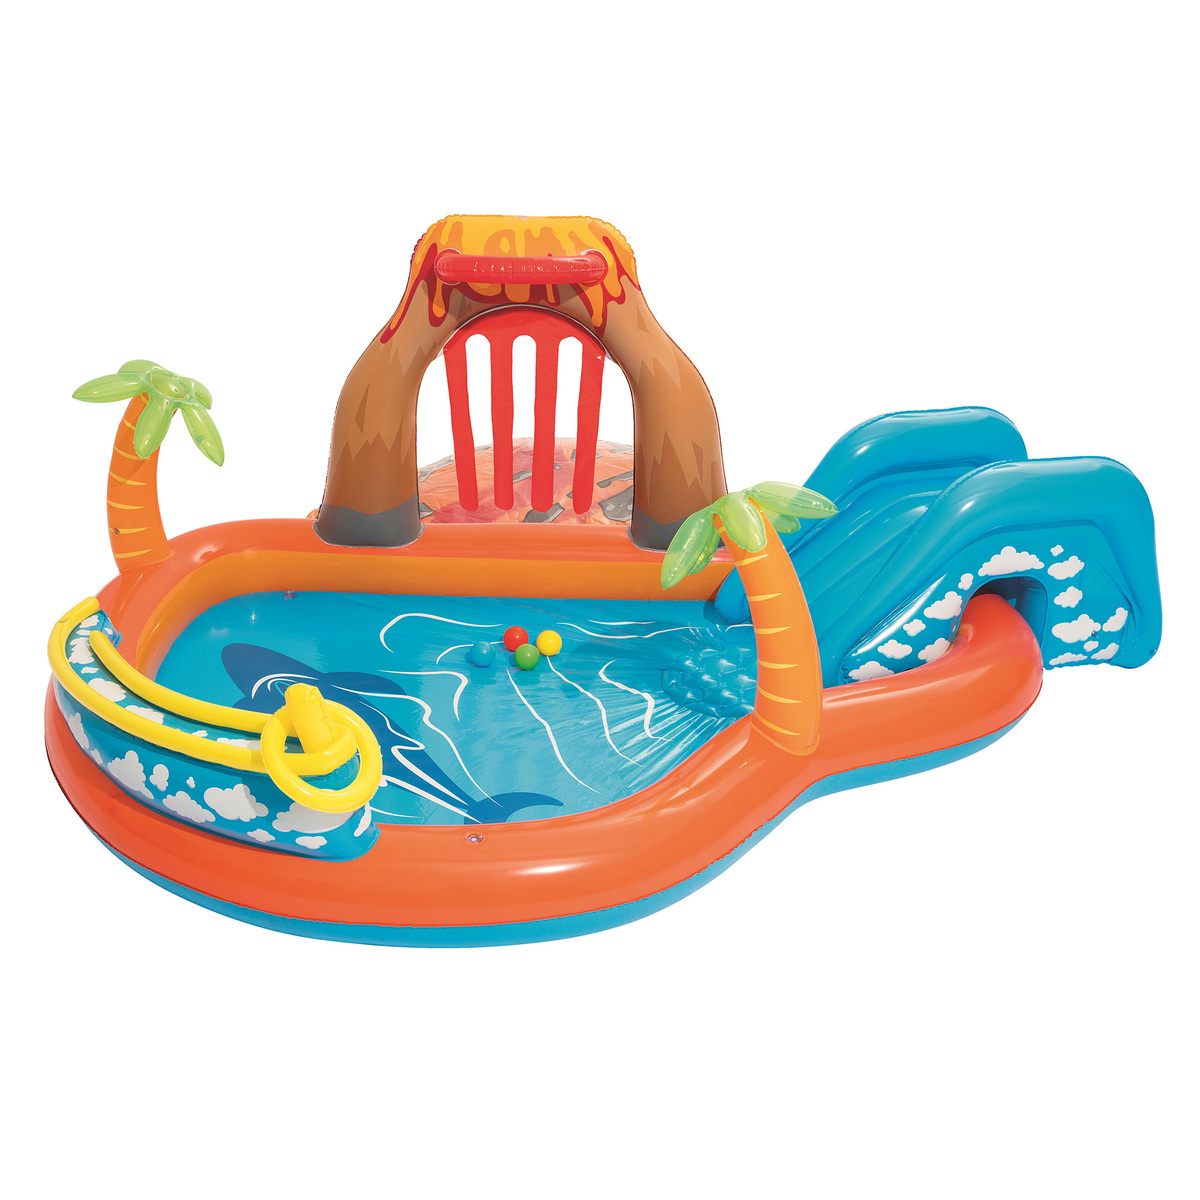 Bsetway Lagoon Play Center 53069